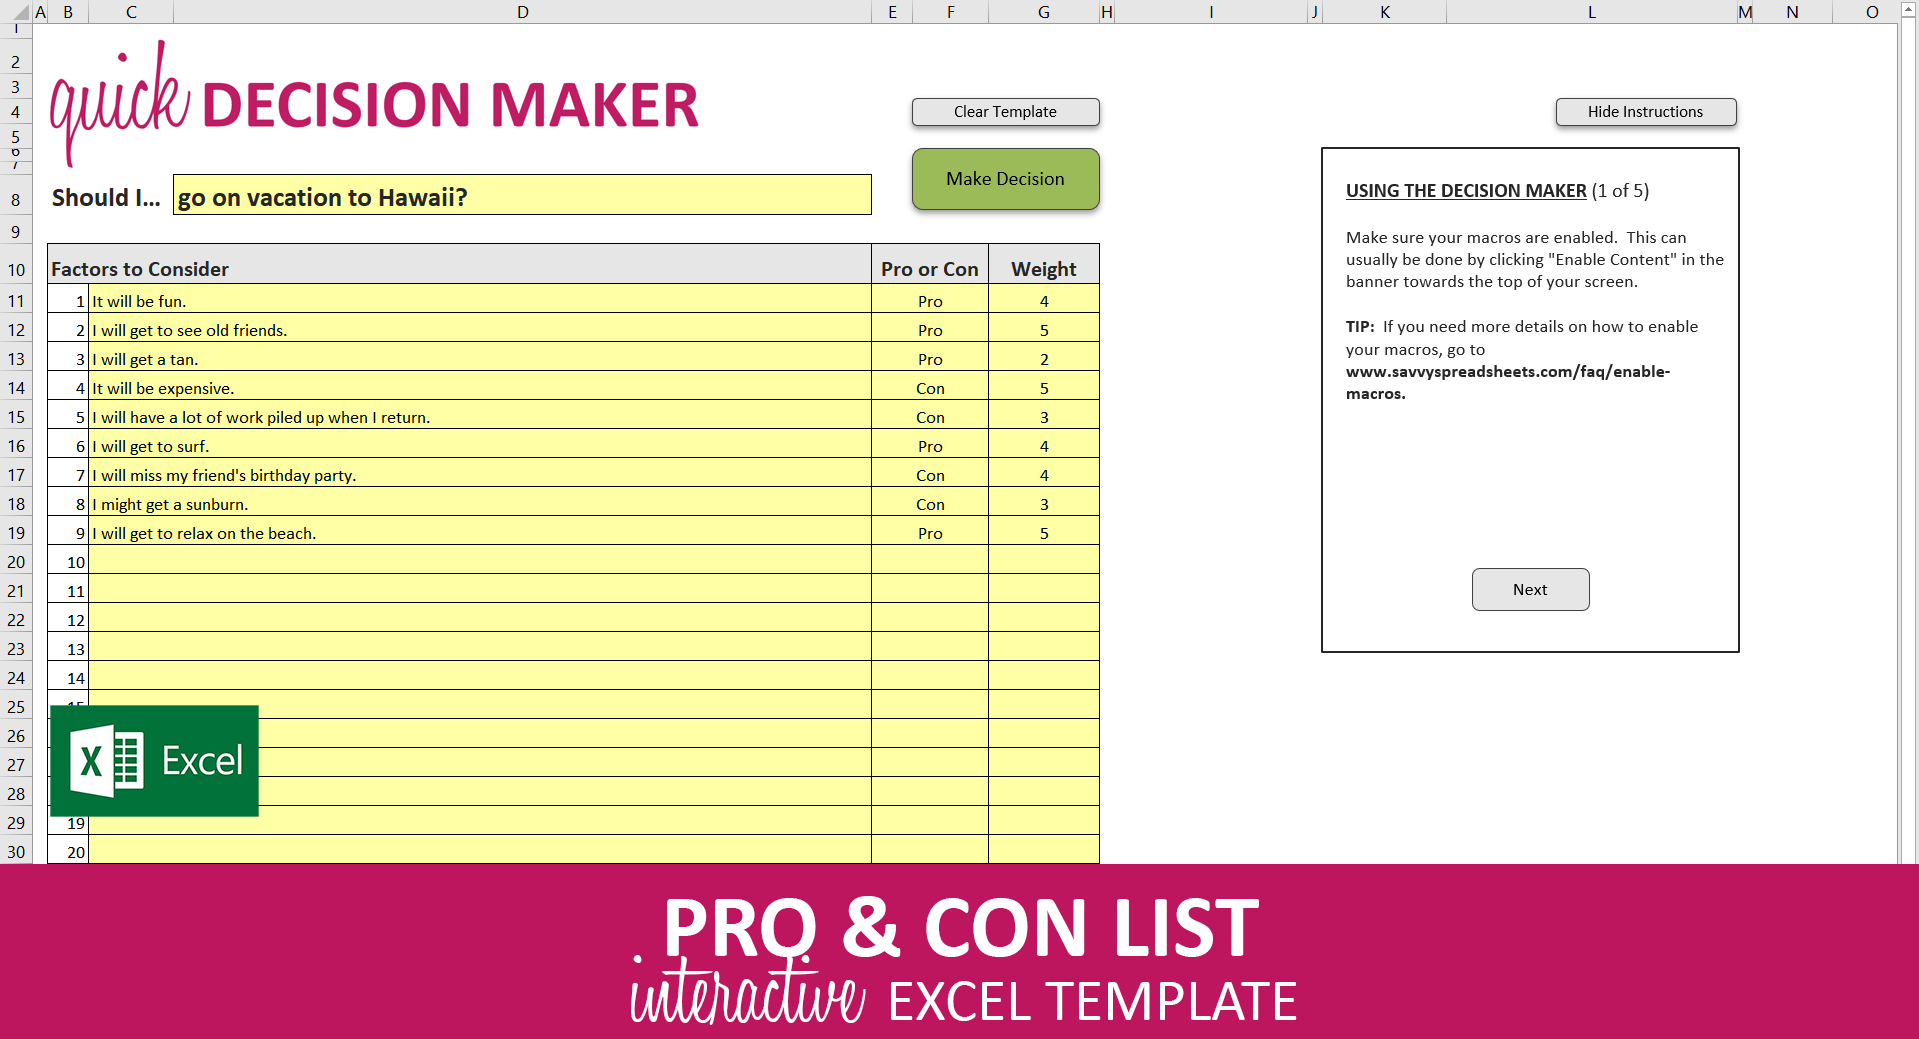 Excel Templates: Pros And Cons Worksheet Template